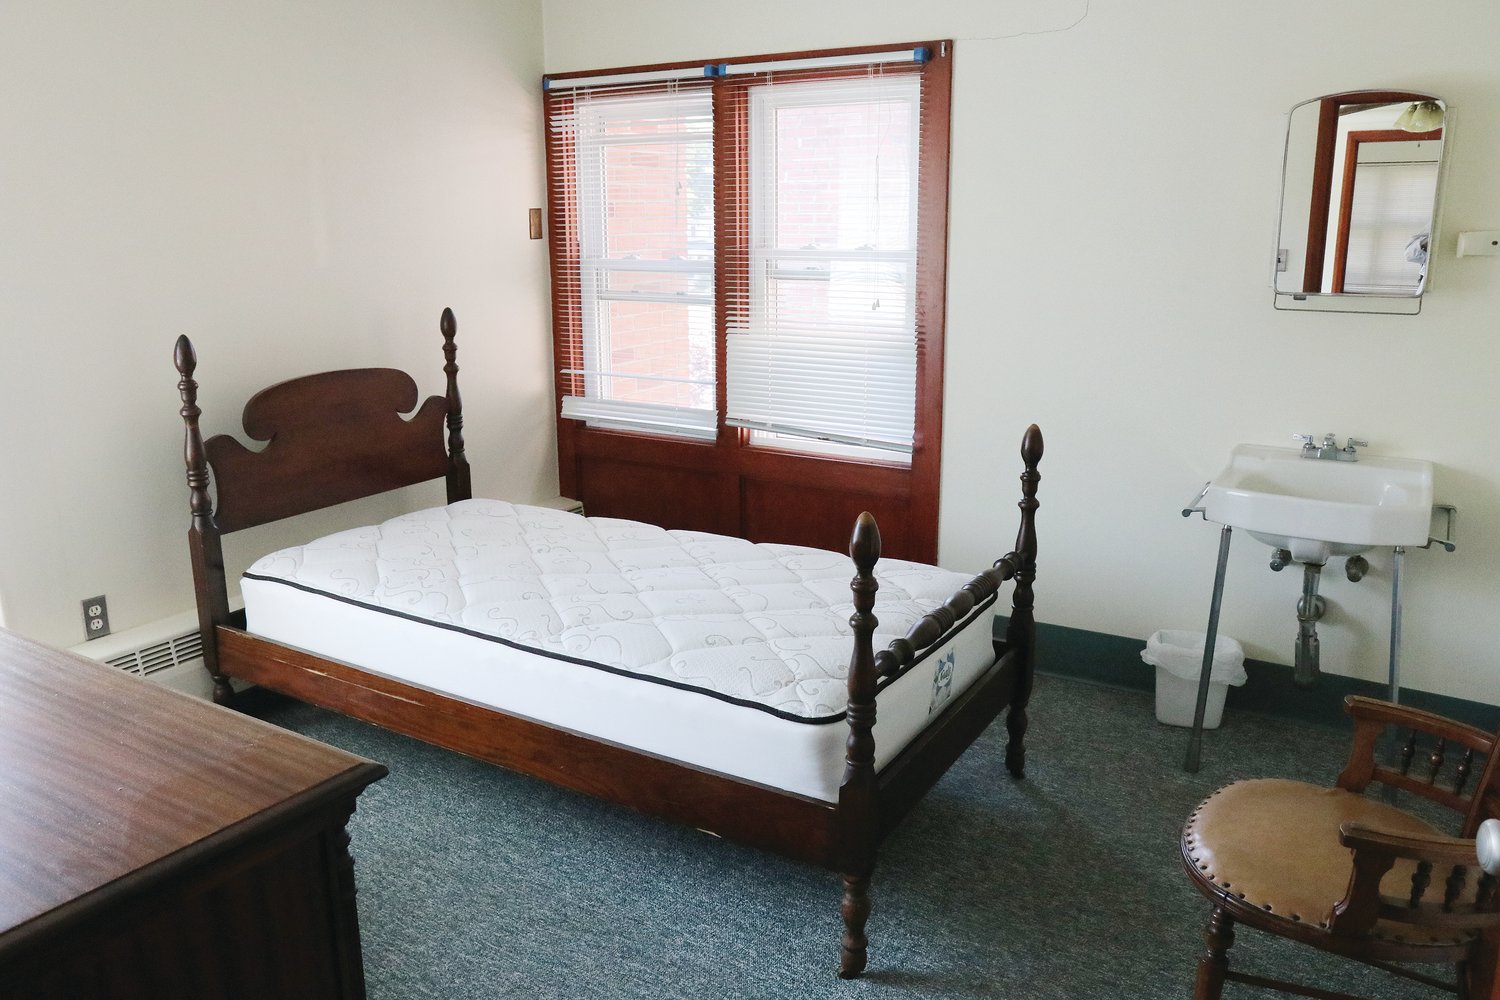 The bedroom furniture left behind will be used by guests of the diocese’s Emmanuel House homeless shelter as they transition to their own apartments.